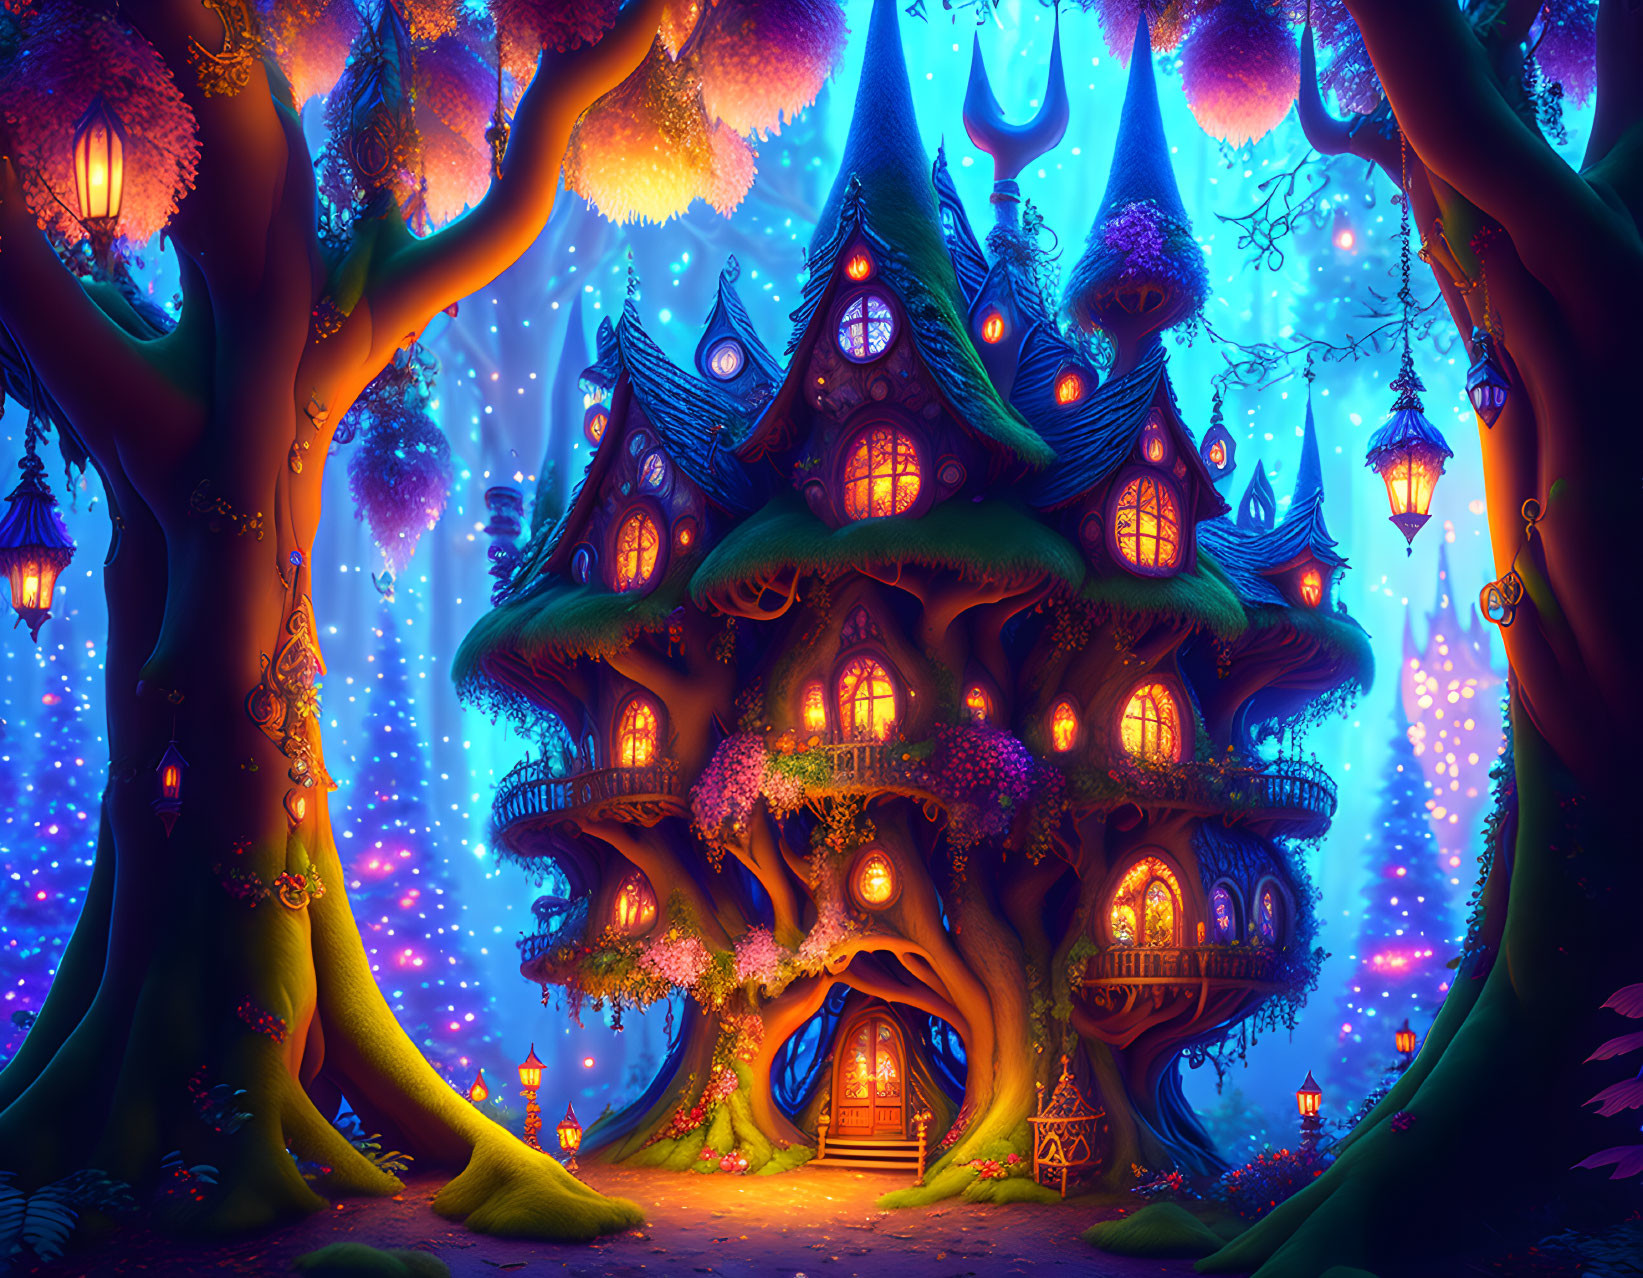 Enchanted Treehouse in Magical Forest with Glowing Windows